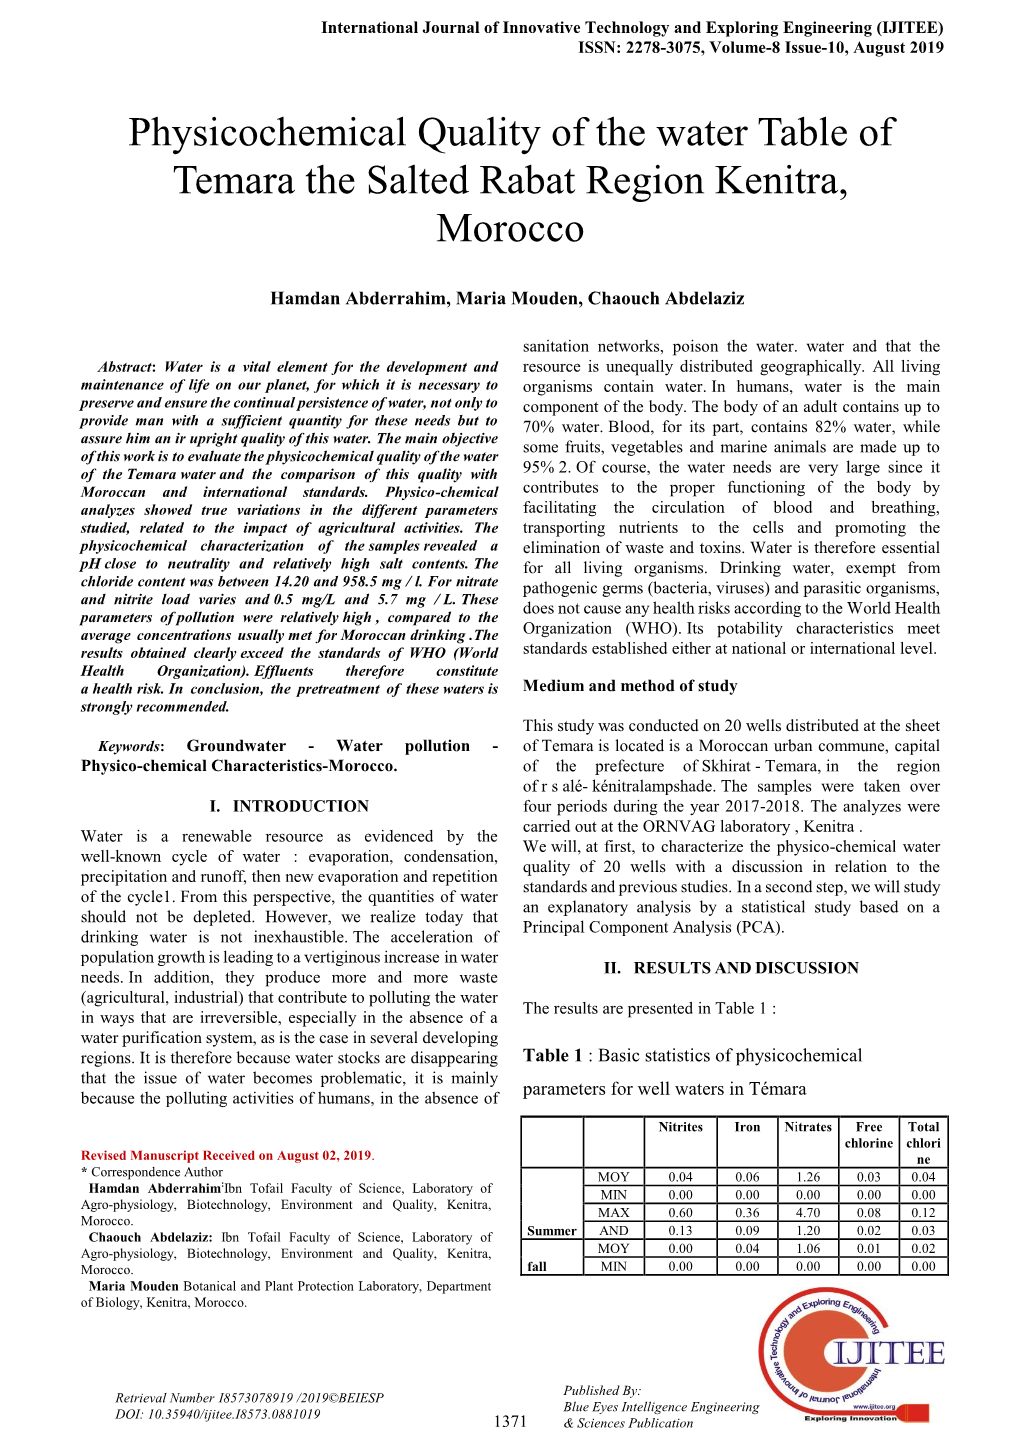 Physicochemical Quality of the Water Table of Temara the Salted Rabat Region Kenitra, Morocco